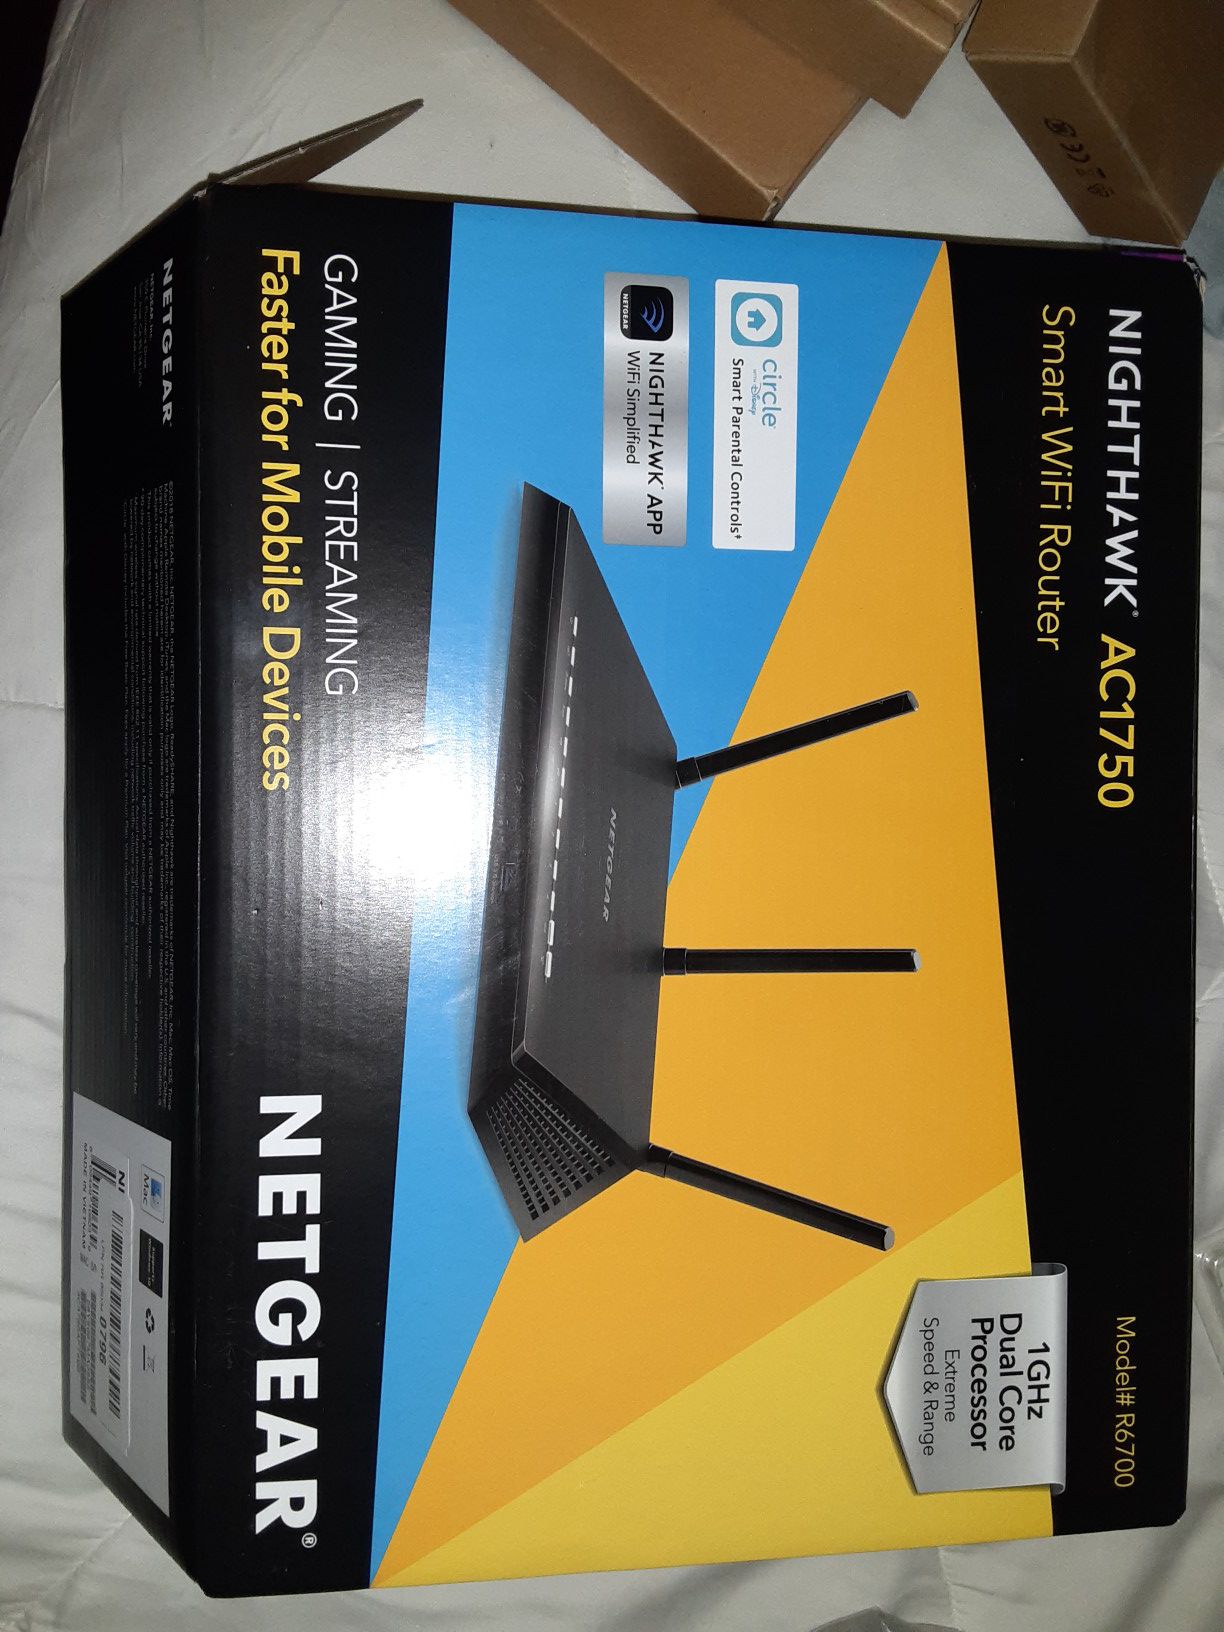 New NETGEAR NIGHTHAWK wifi ROUTER great for gaming